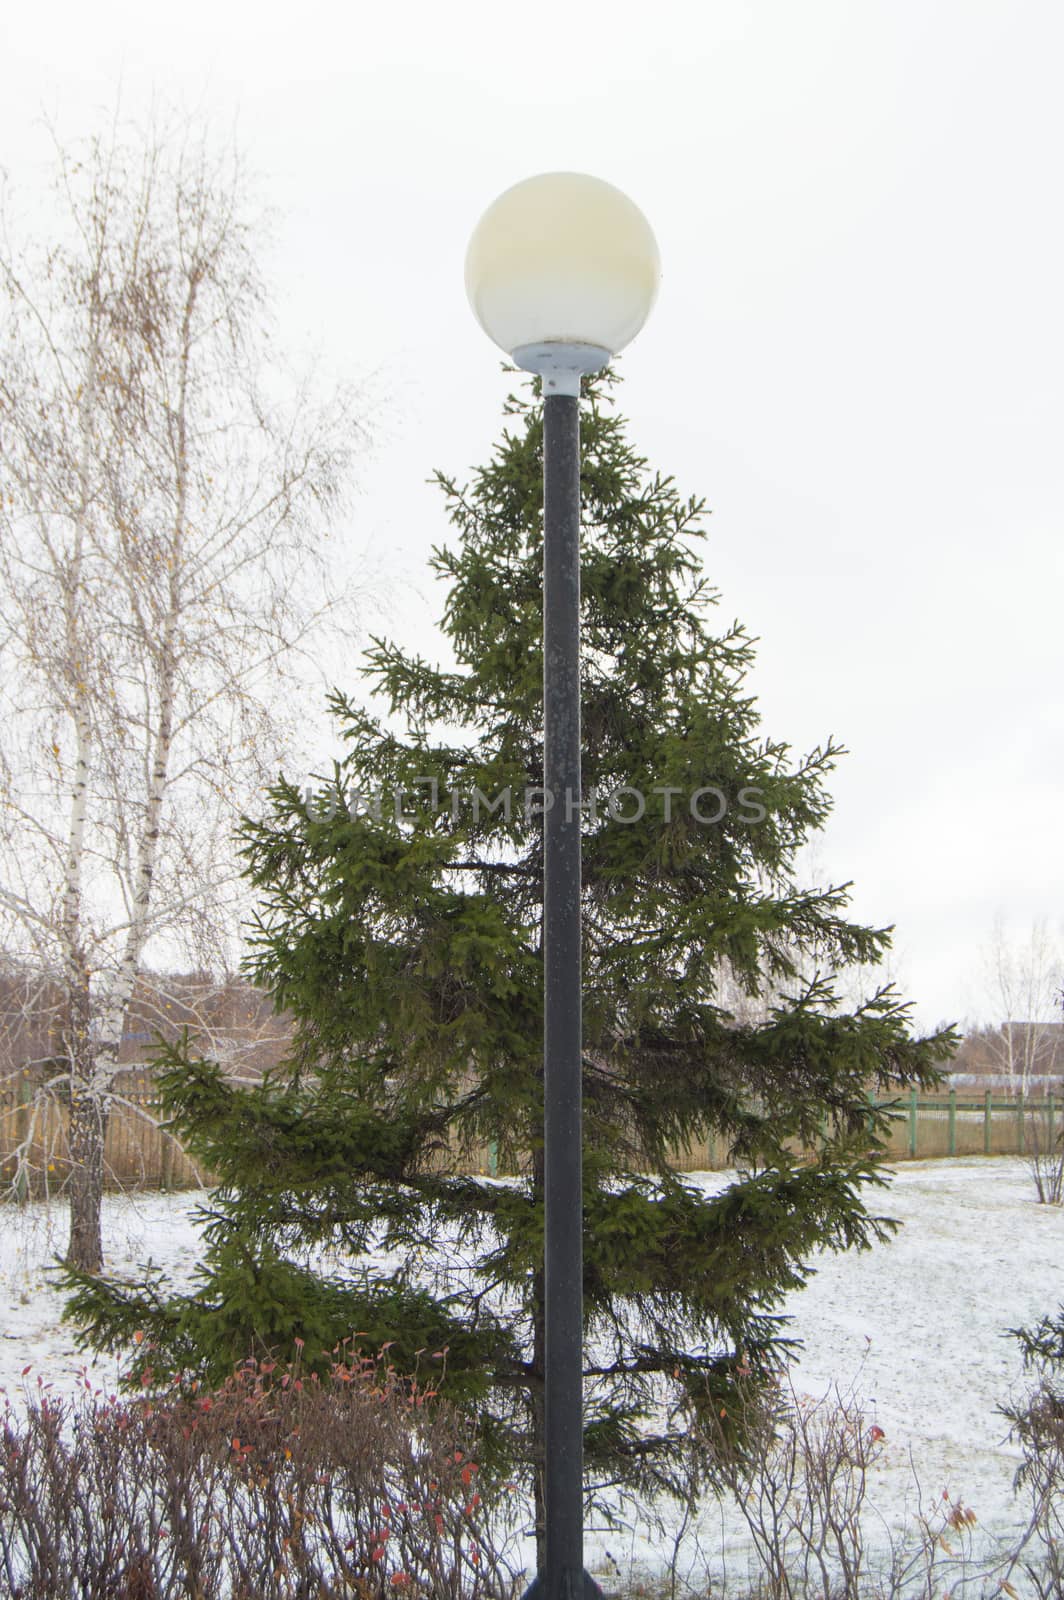 Funny picture - the lamppost with a white canopy on the top of the tree spruce tree winter in the Park.